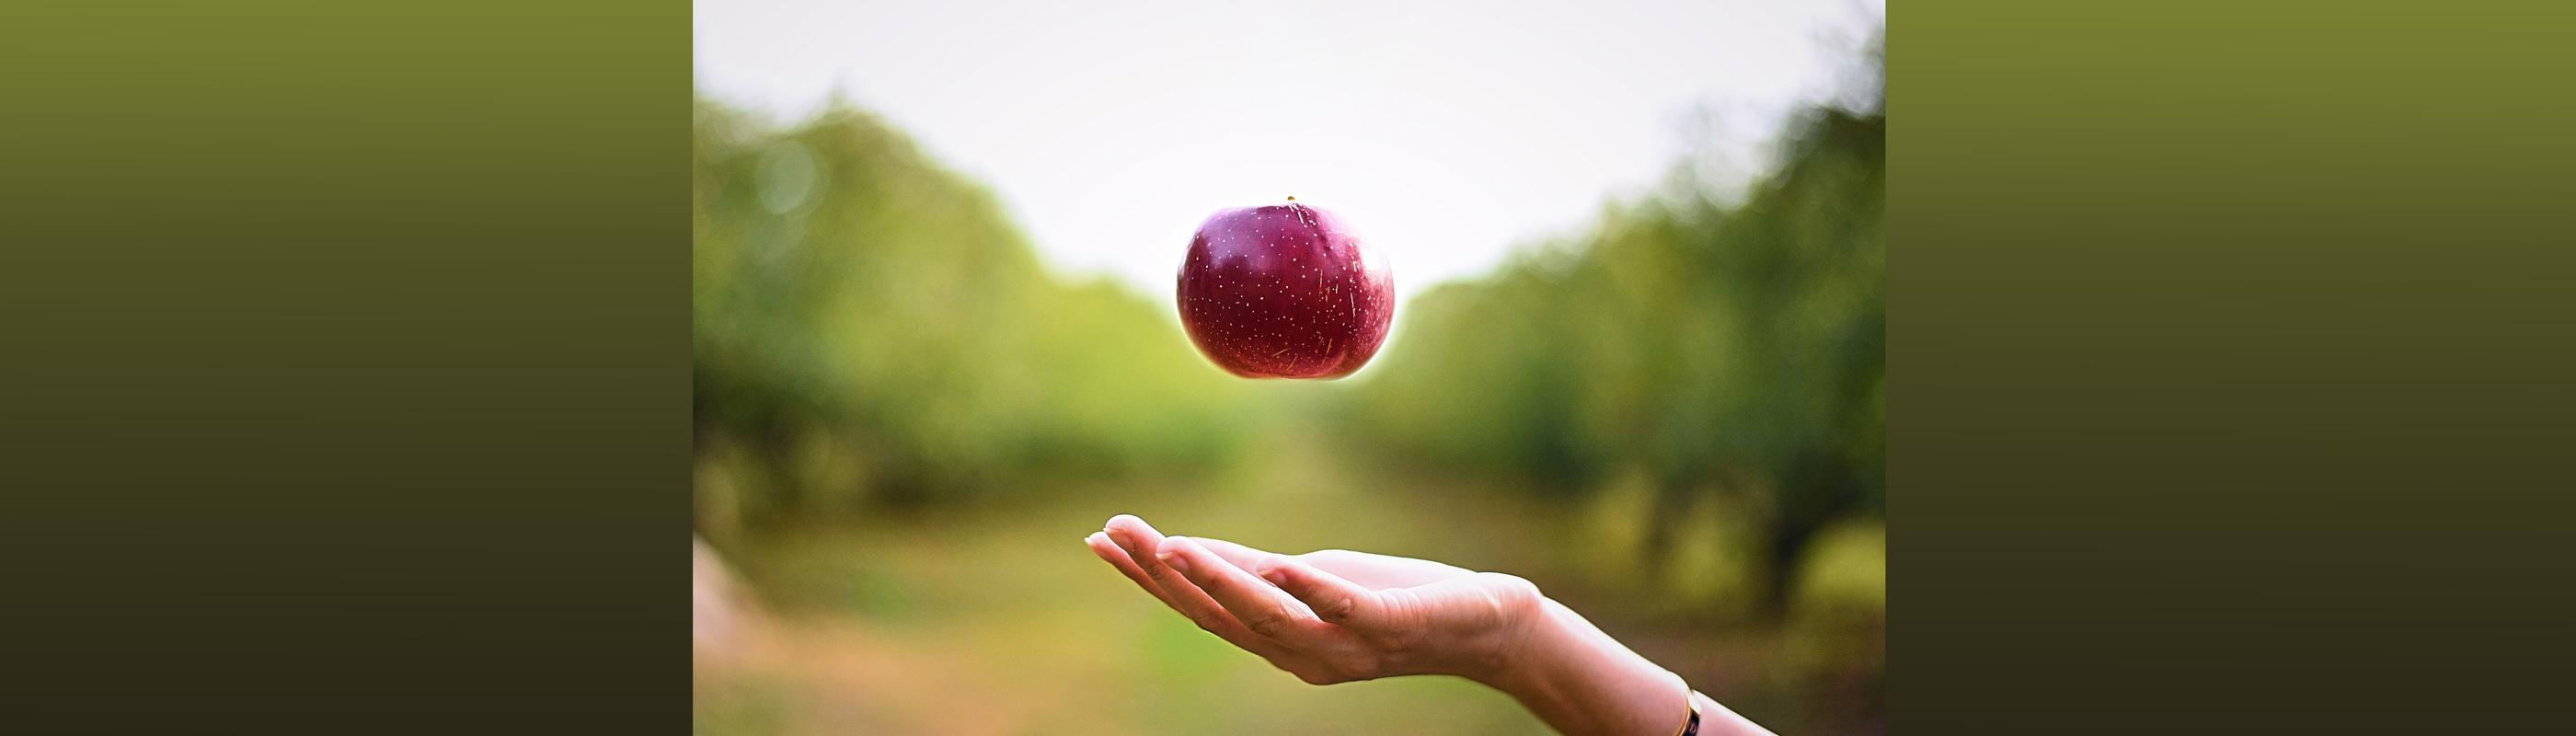 apple falling into a hand